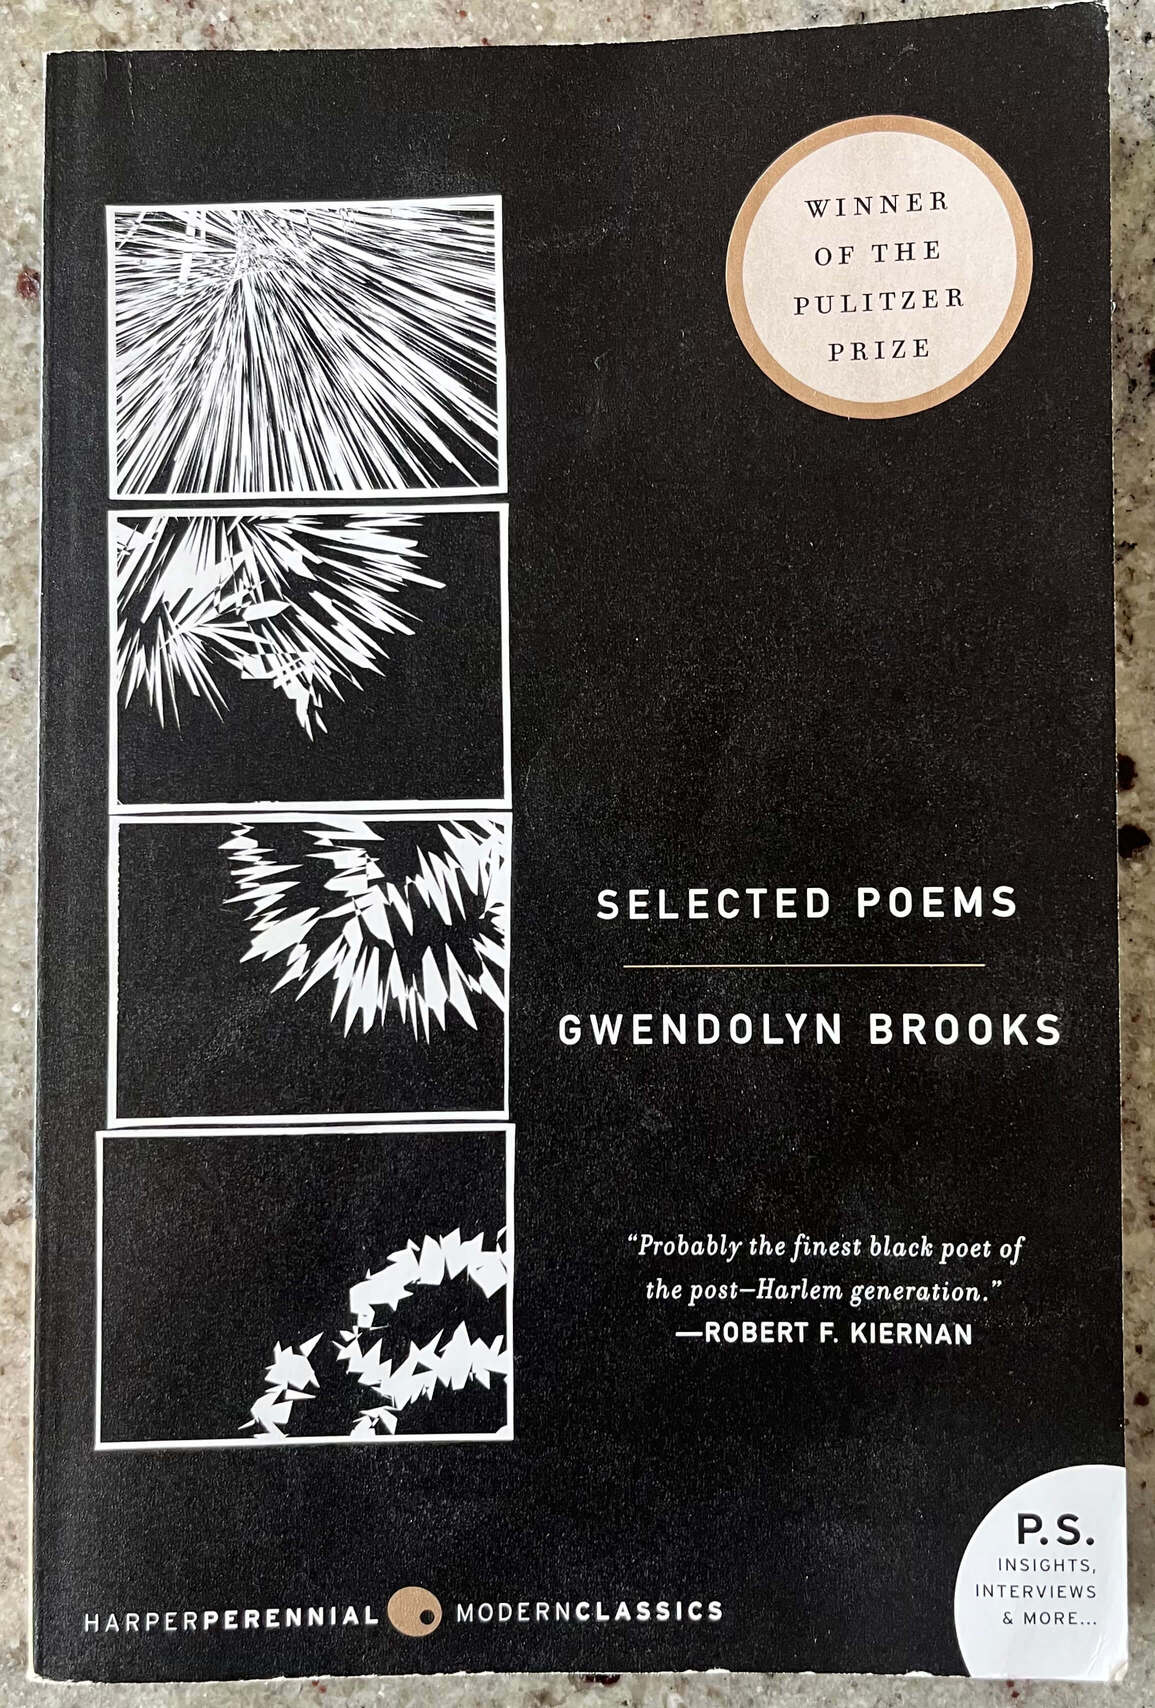 “Selected Poems” by Gwendolyn Brooks.